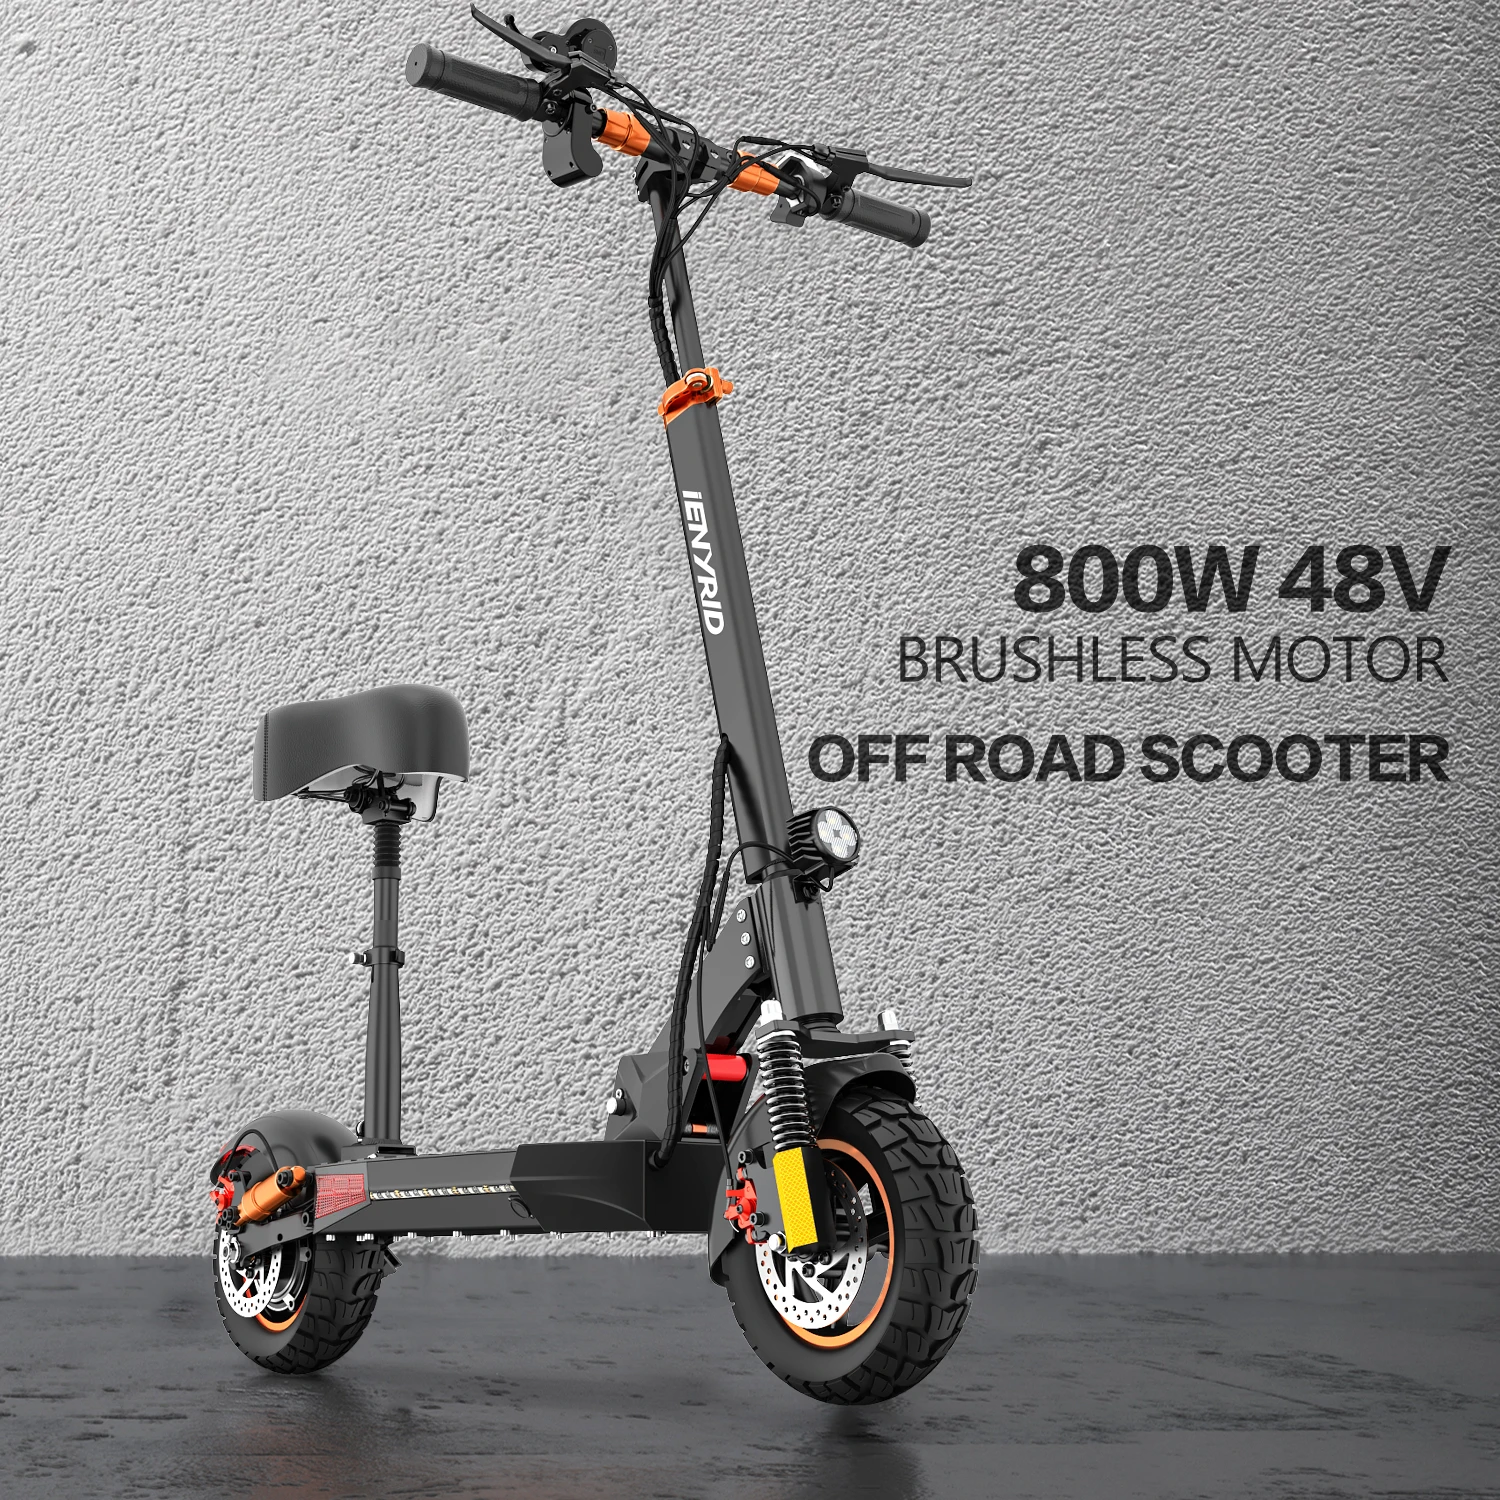 

EU US UK Dropshipping iE kugoo M4 Pro S+ two wheel electric scooter 800W Motor Adult Max Speed 45km/h electric balance scooter